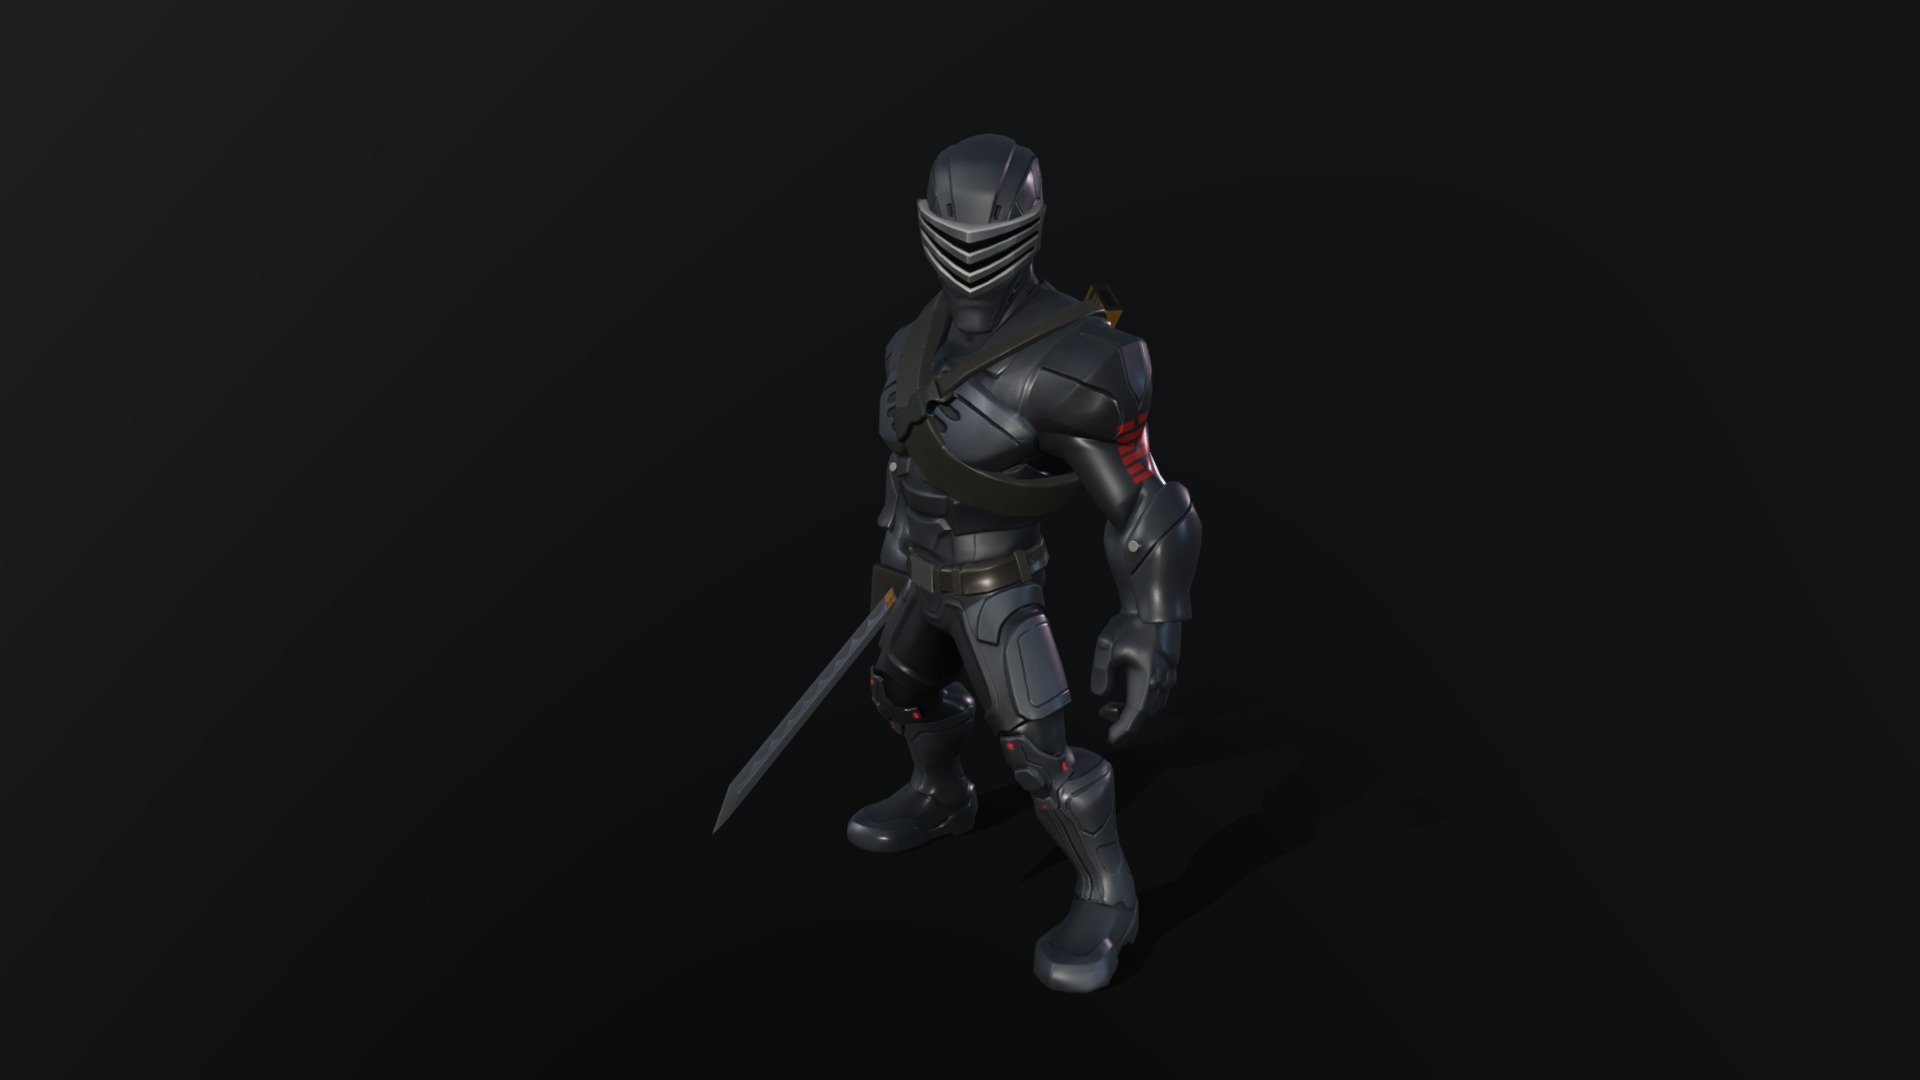 created the new skin using the snake eyes toy from the movie as reference.

used in Zbrush, Maya, Substance Painter and Photoshop.
stylisied highpoly character based on the GiJoe Legend's art concept 3d model